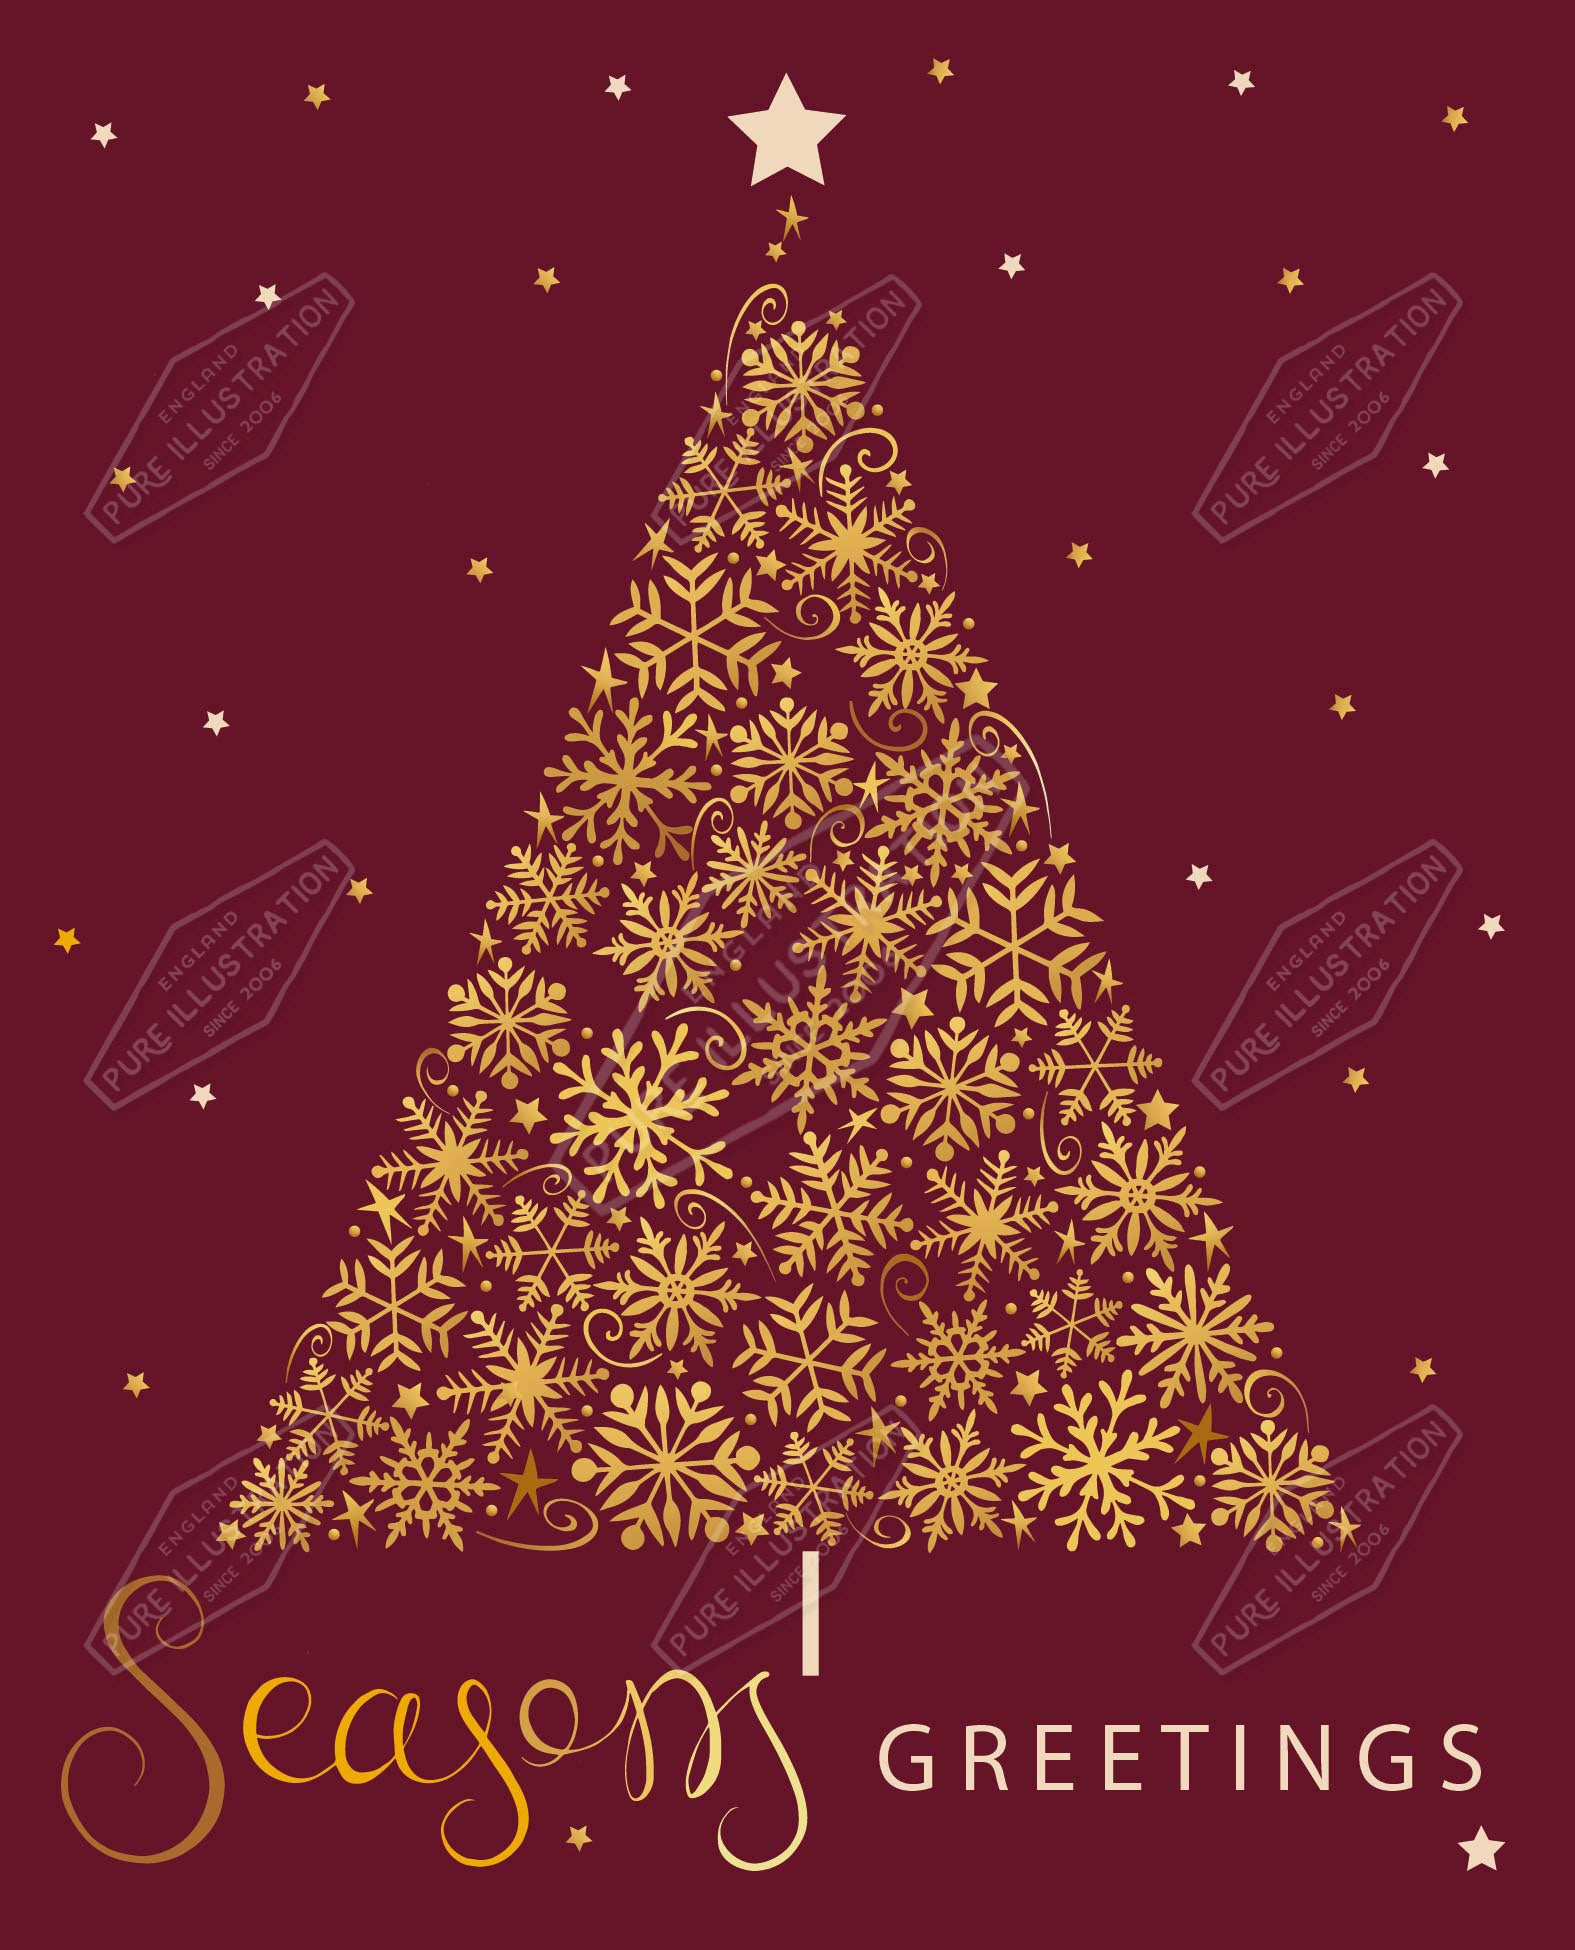 00035234SPI- Sarah Pitt is represented by Pure Art Licensing Agency - Christmas Greeting Card Design